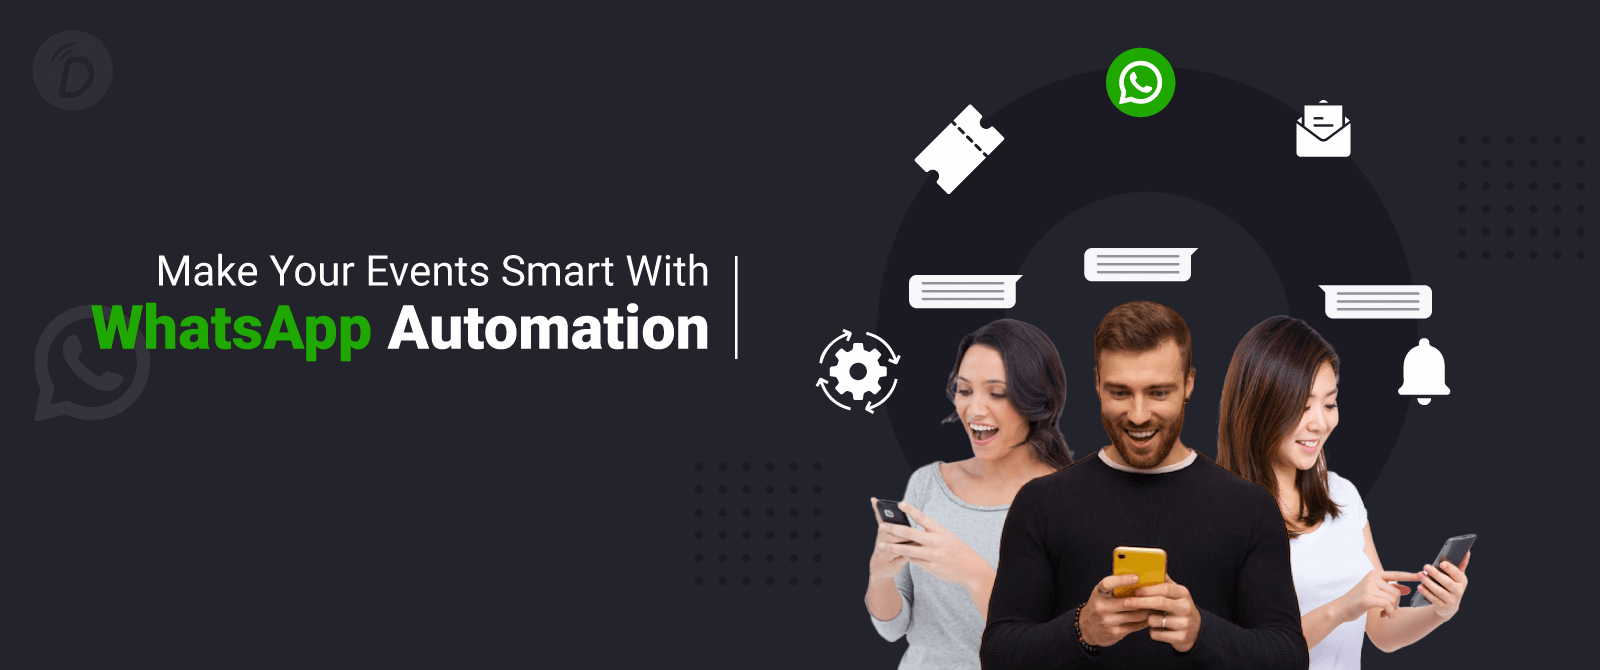 Make Your Events Smart With WhatsApp Automation